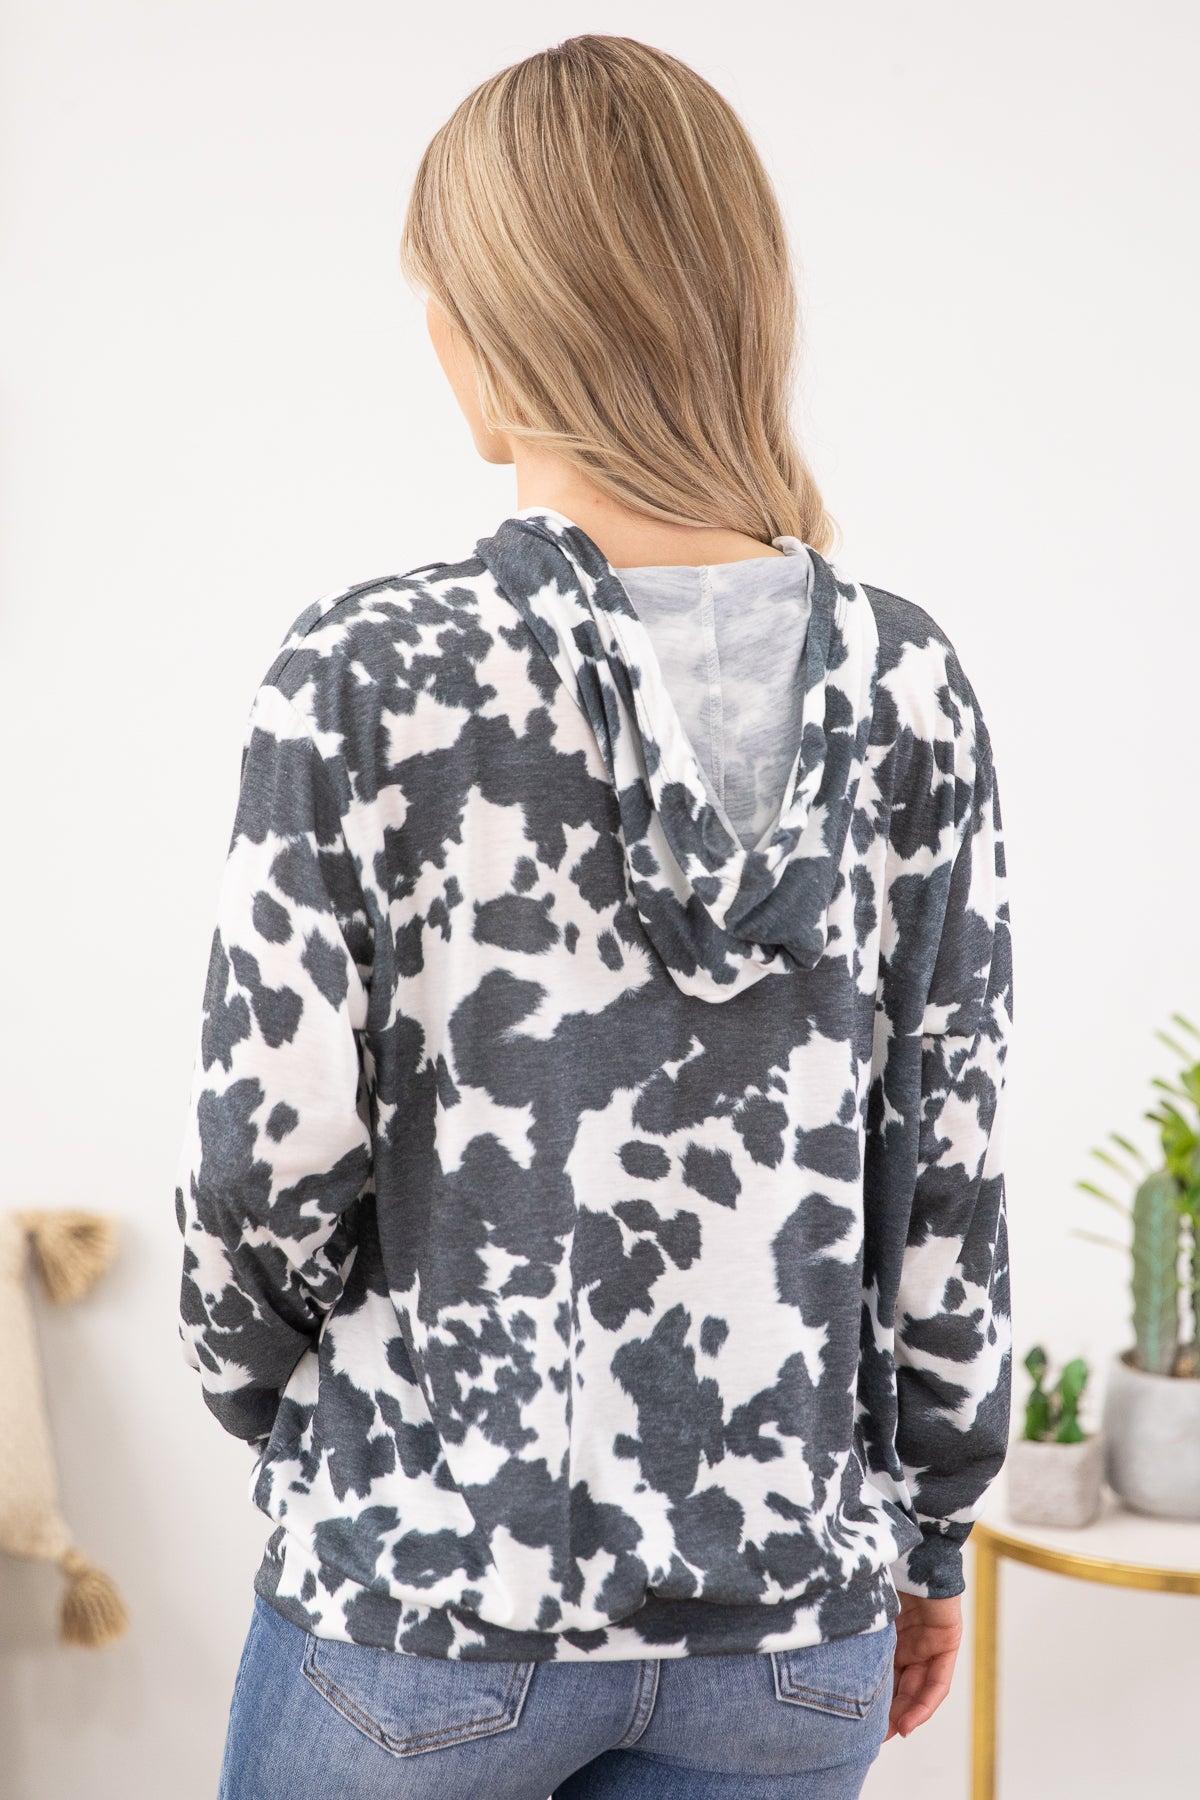 Charcoal and White Cow Print Hooded Top - Filly Flair